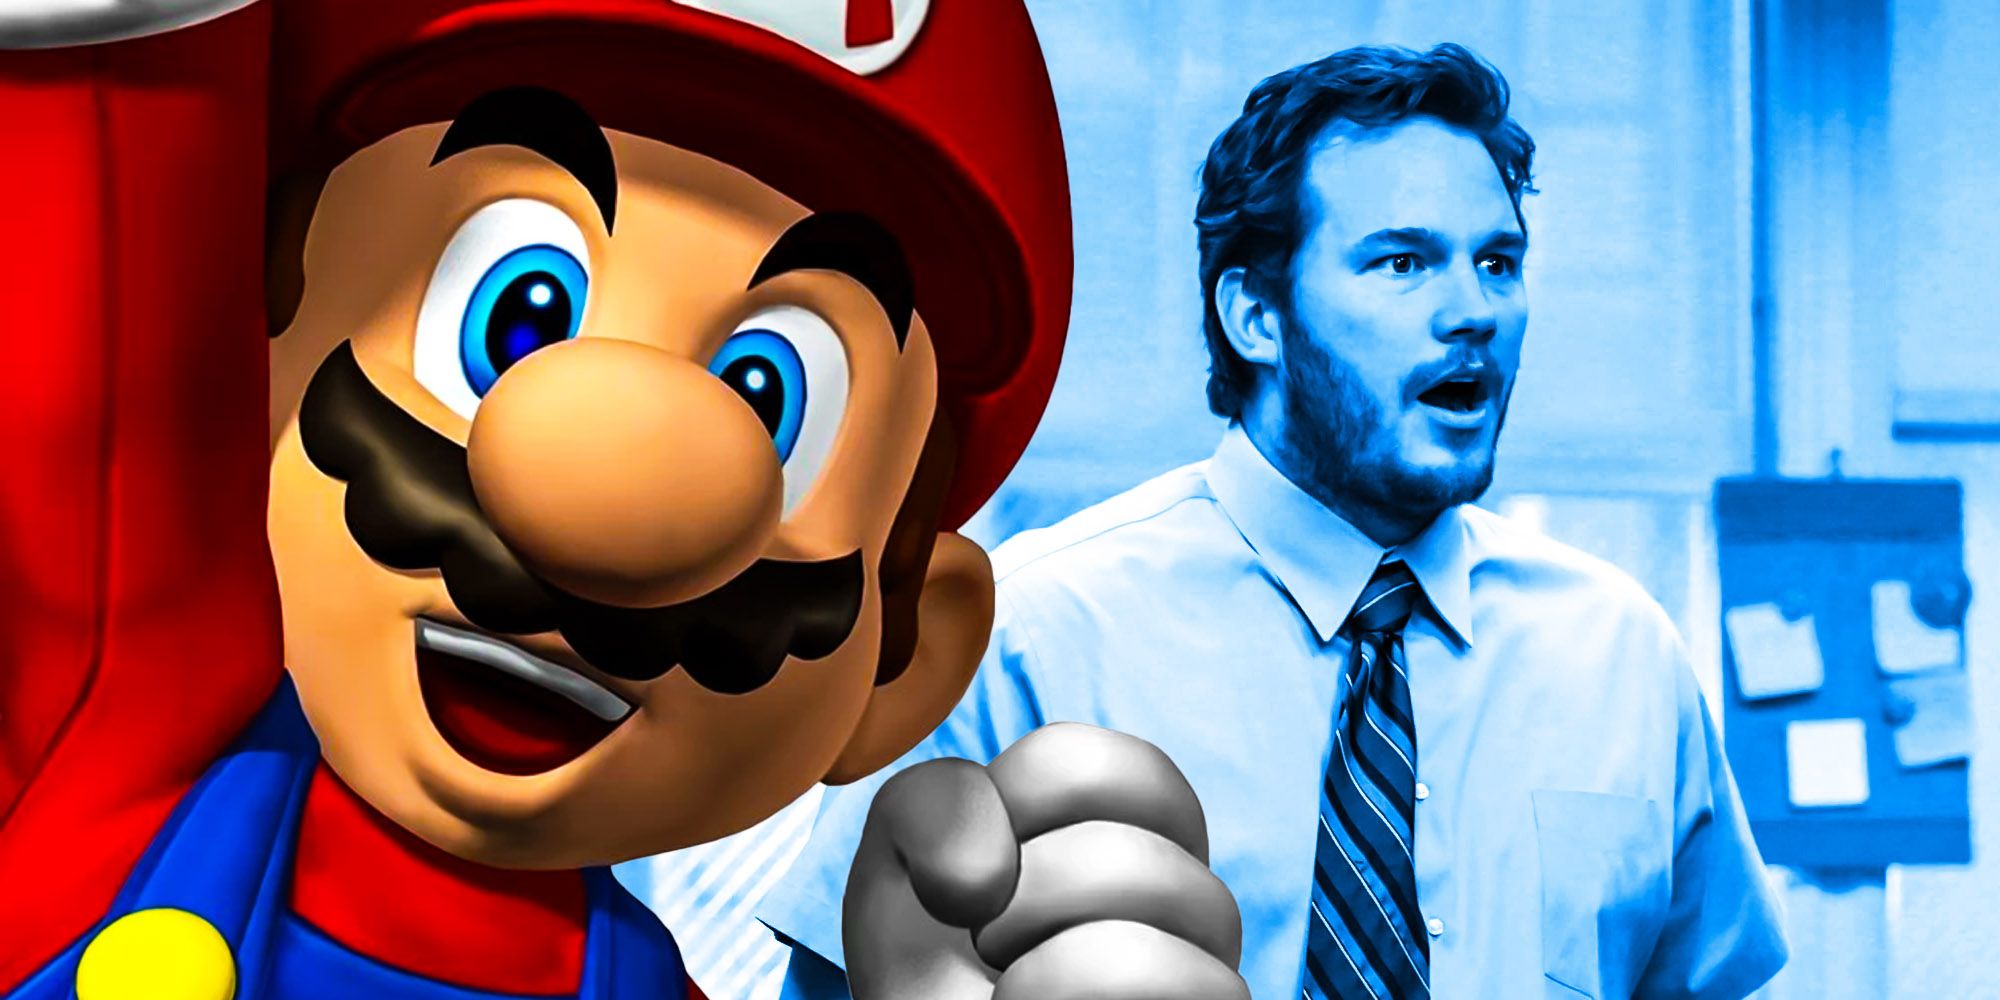 Is Chris Pratt’s Mario Voice…Bad? Does It Work For The Movie?